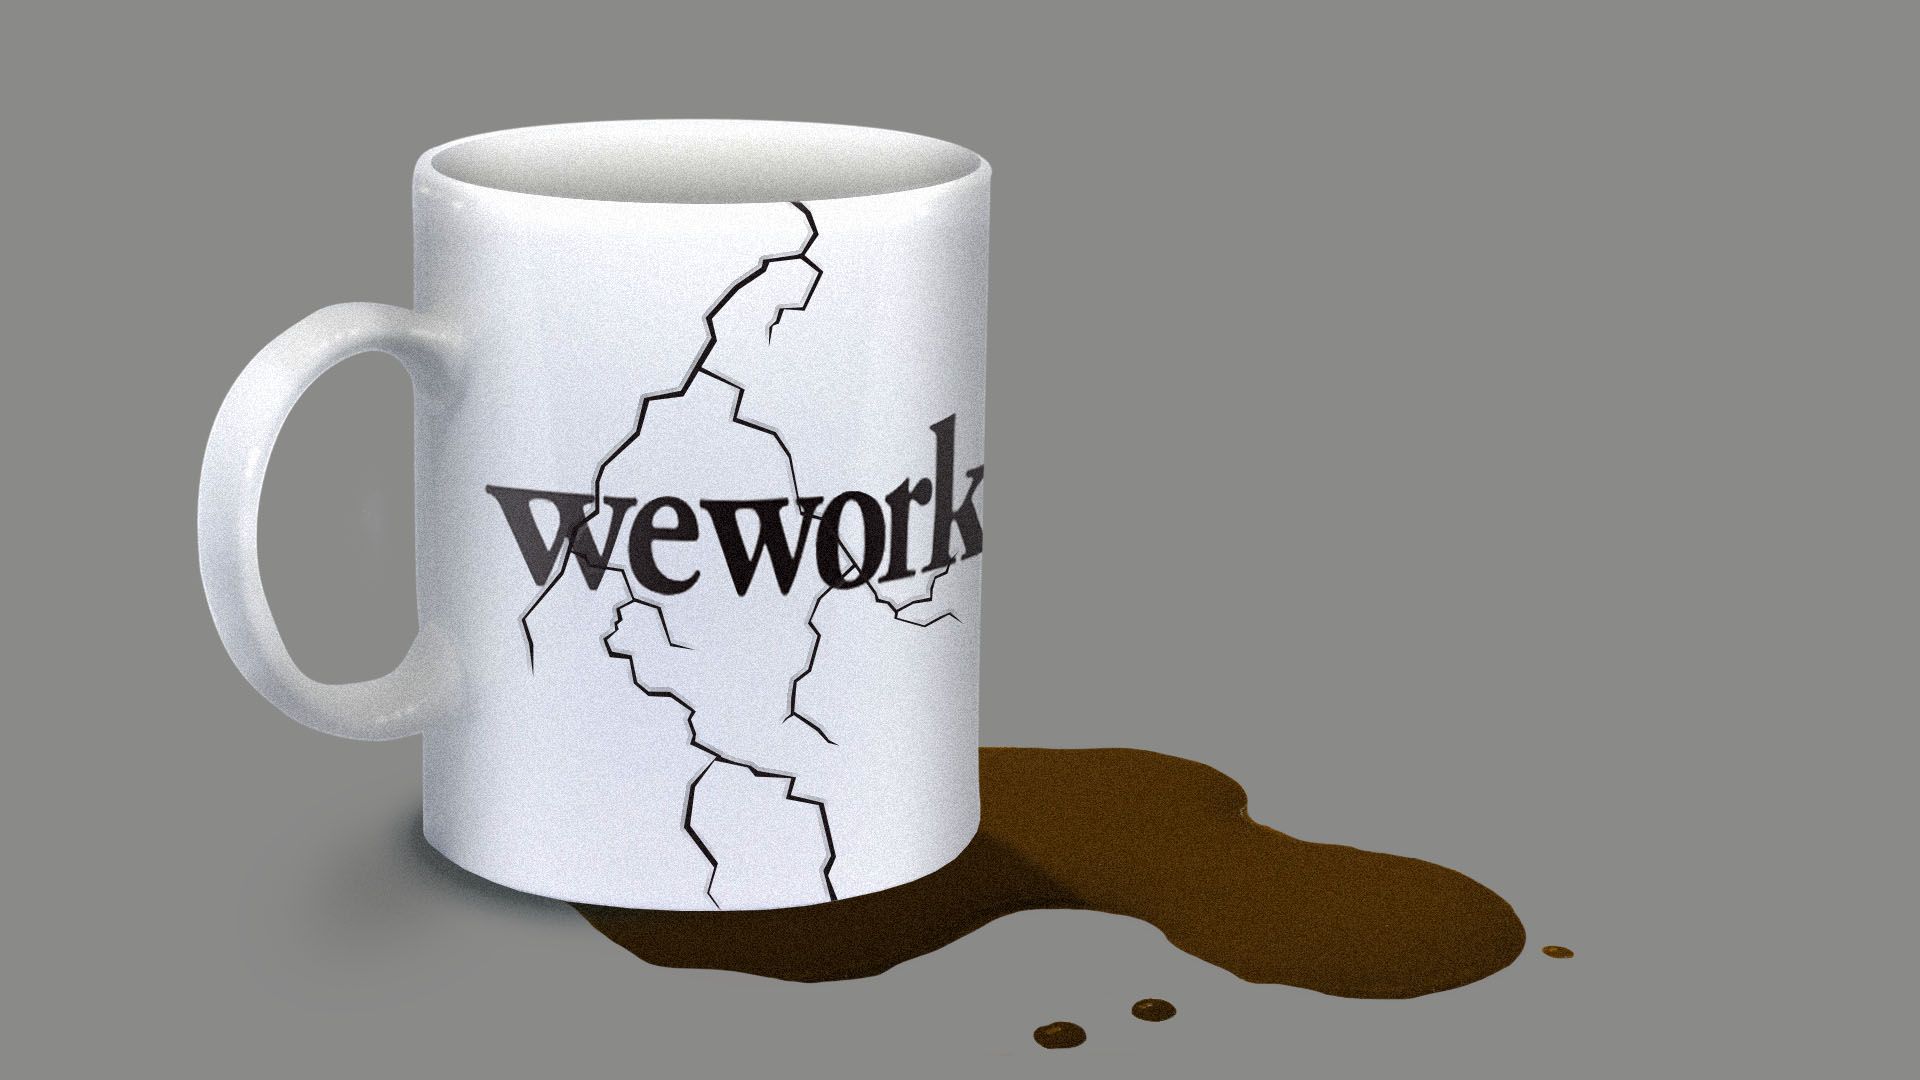 Illustration of a broken coffee mug with a WeWork logo on it